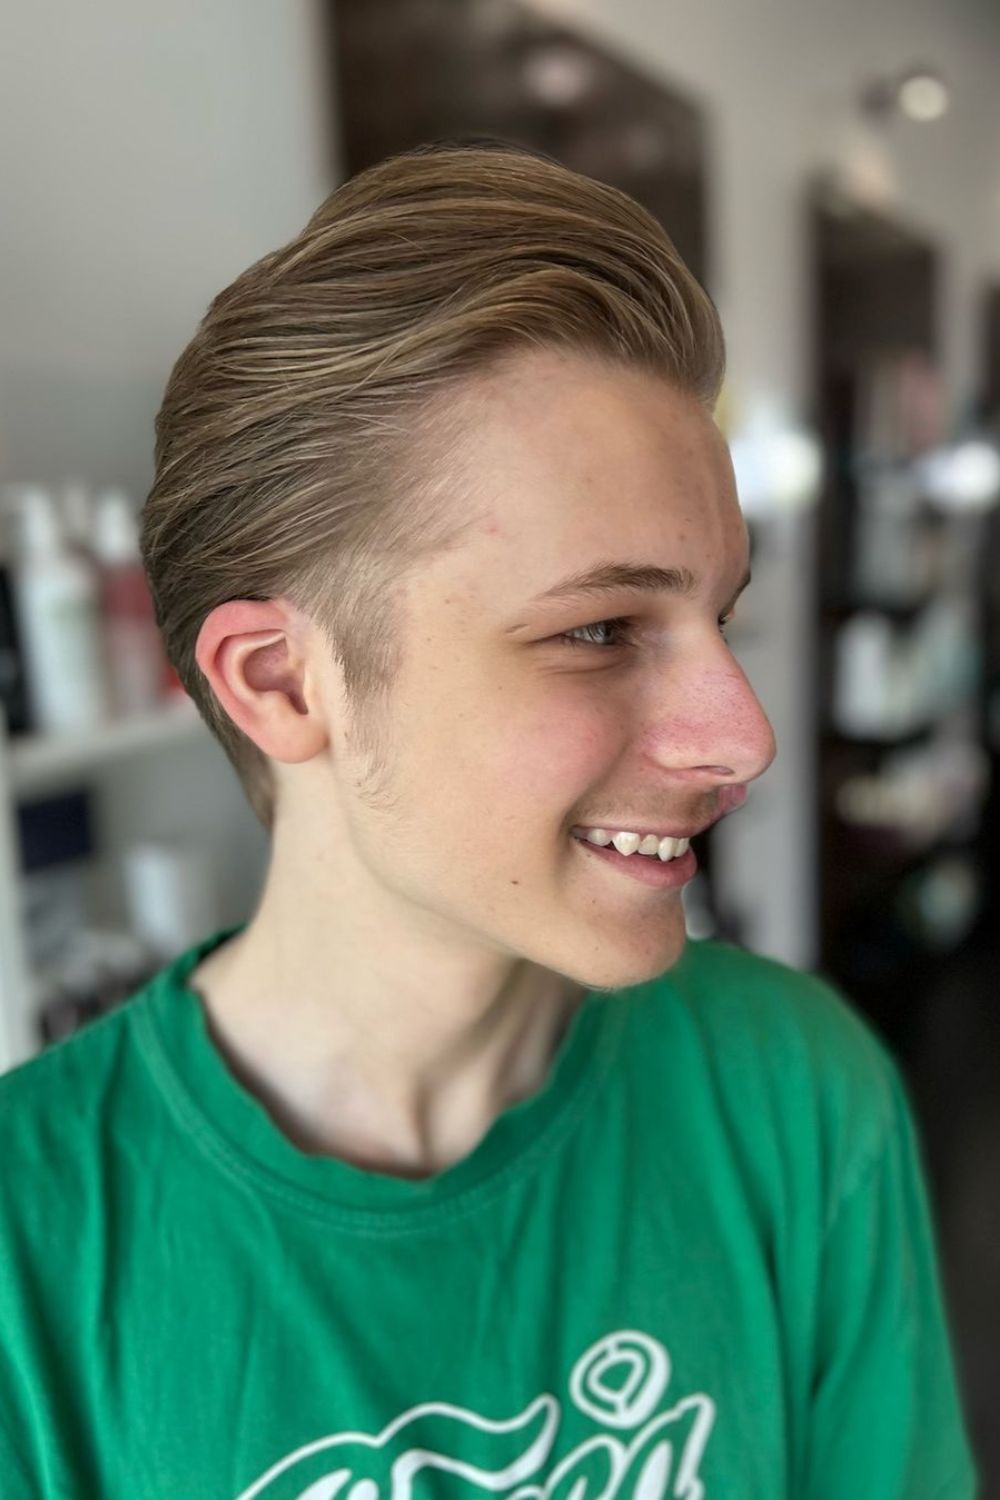 A man with a blonde slicked back hair.